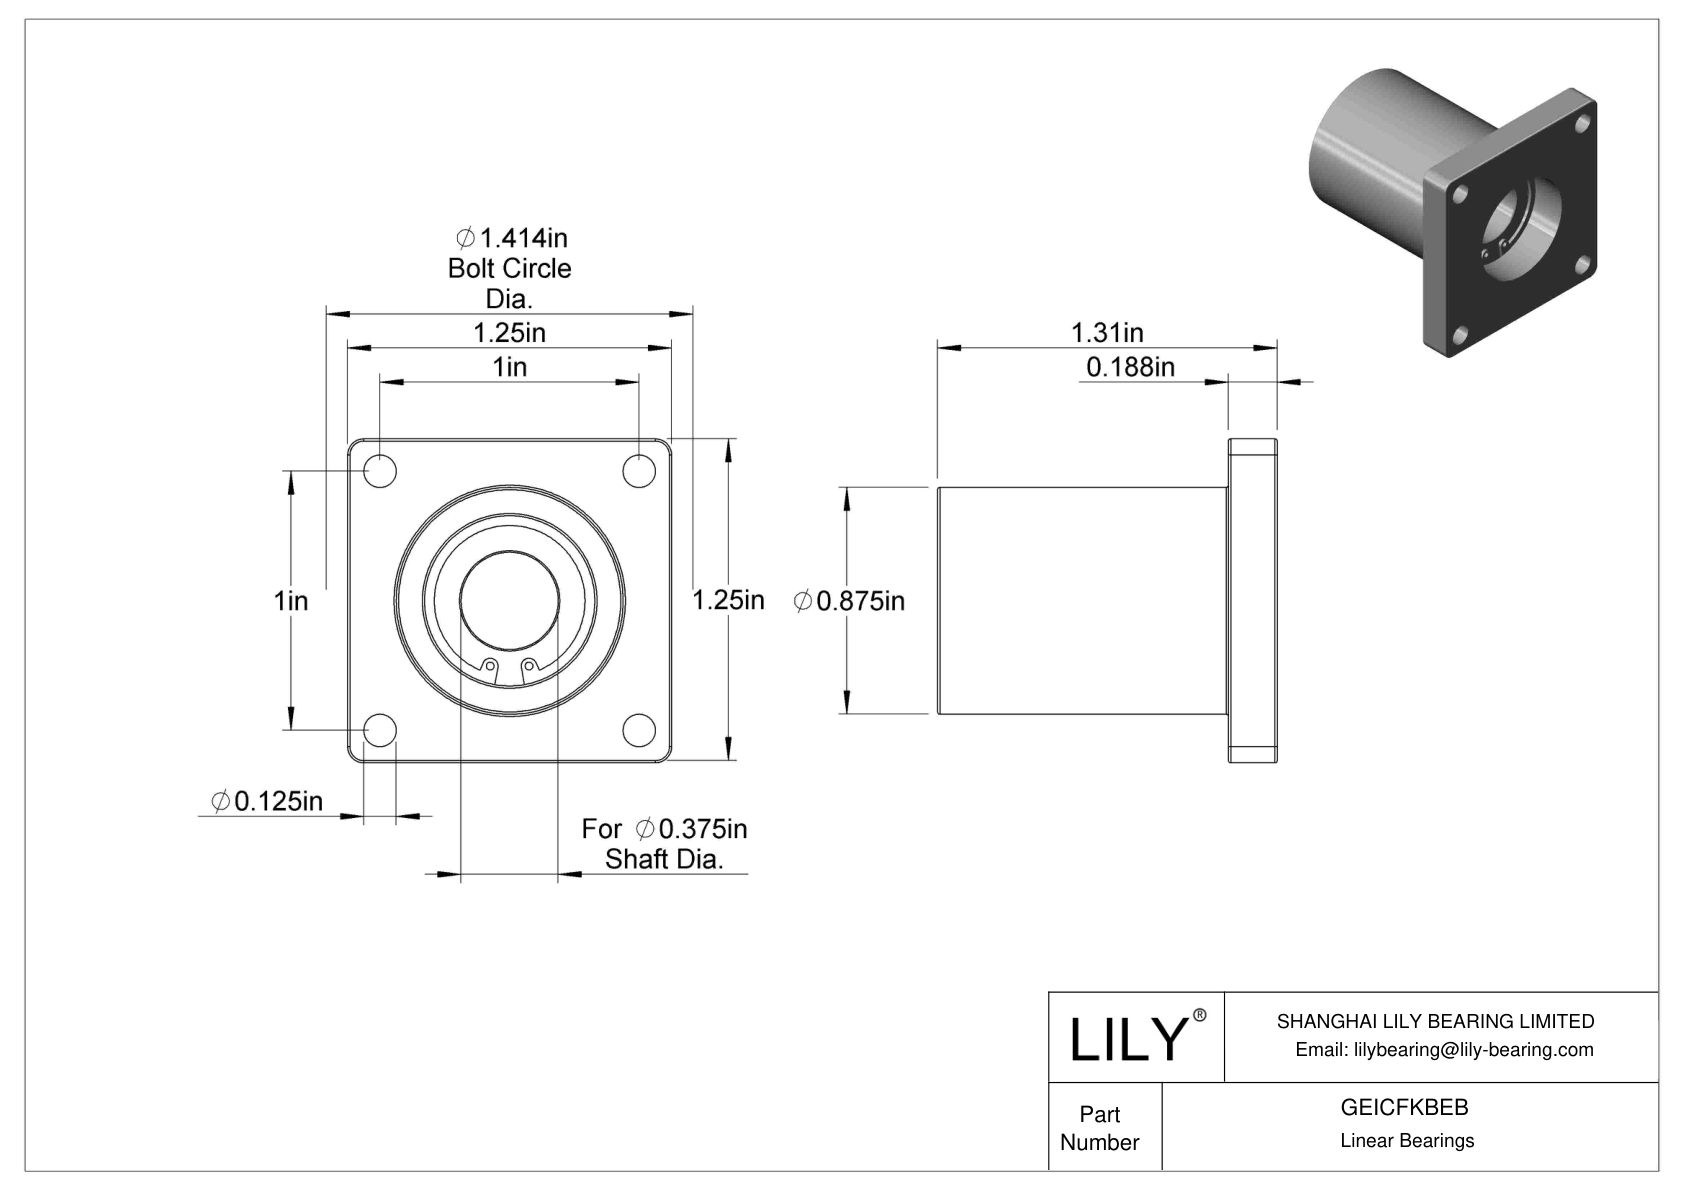 GEICFKBEB Chemical-Resistant Flange-Mounted Linear Sleeve Bearings cad drawing